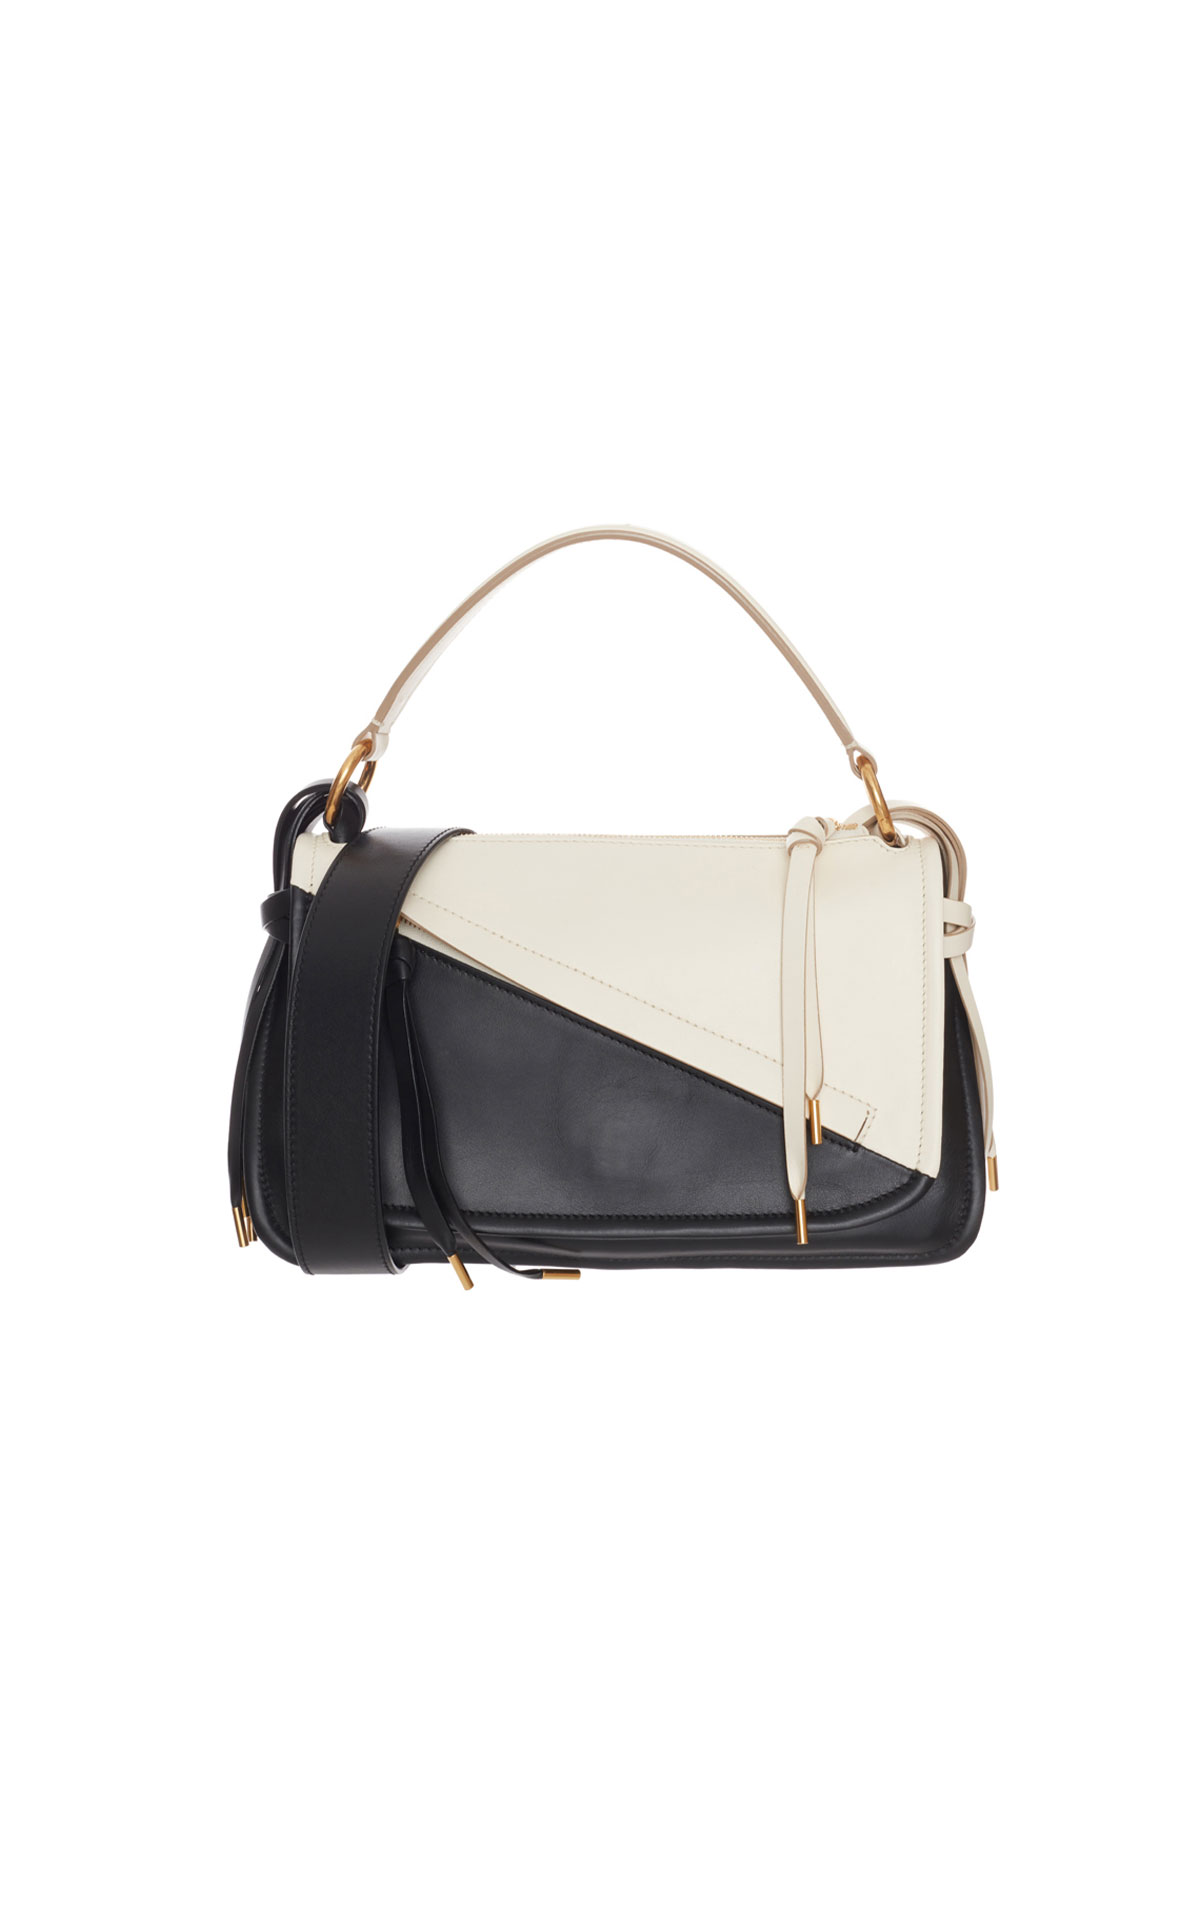 Bally Black and white leather bag from Bicester Village